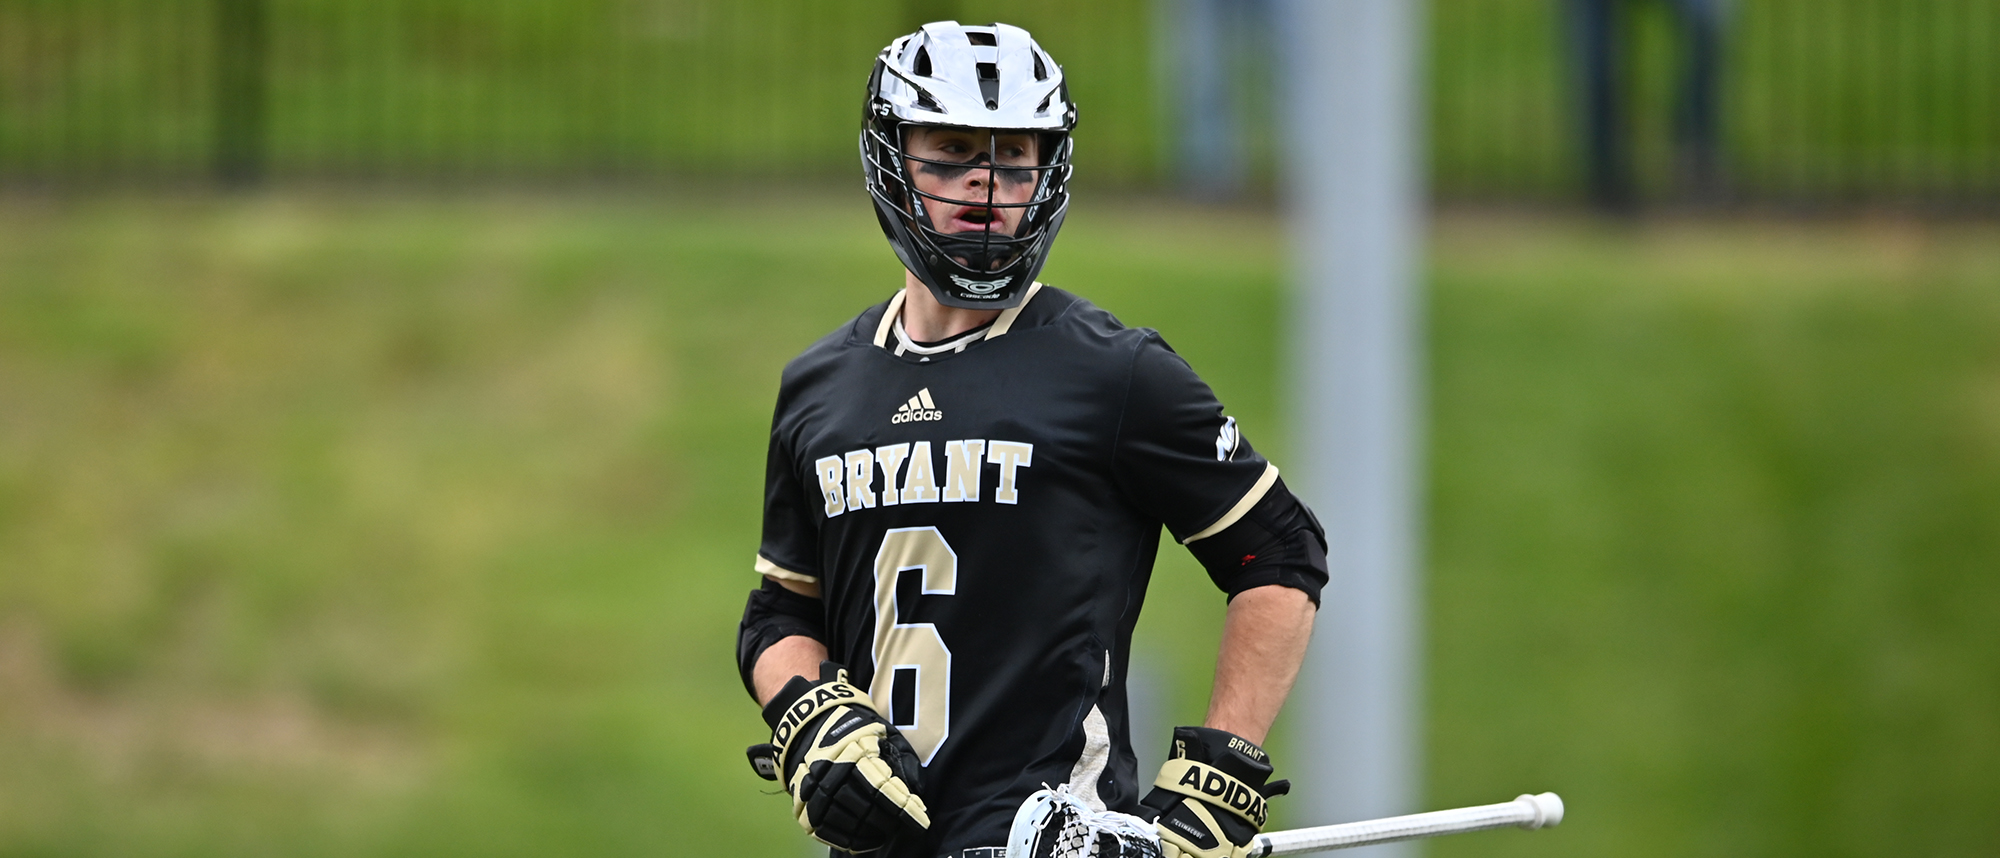 Bryant faces Virginia Sunday in NCAA First Round